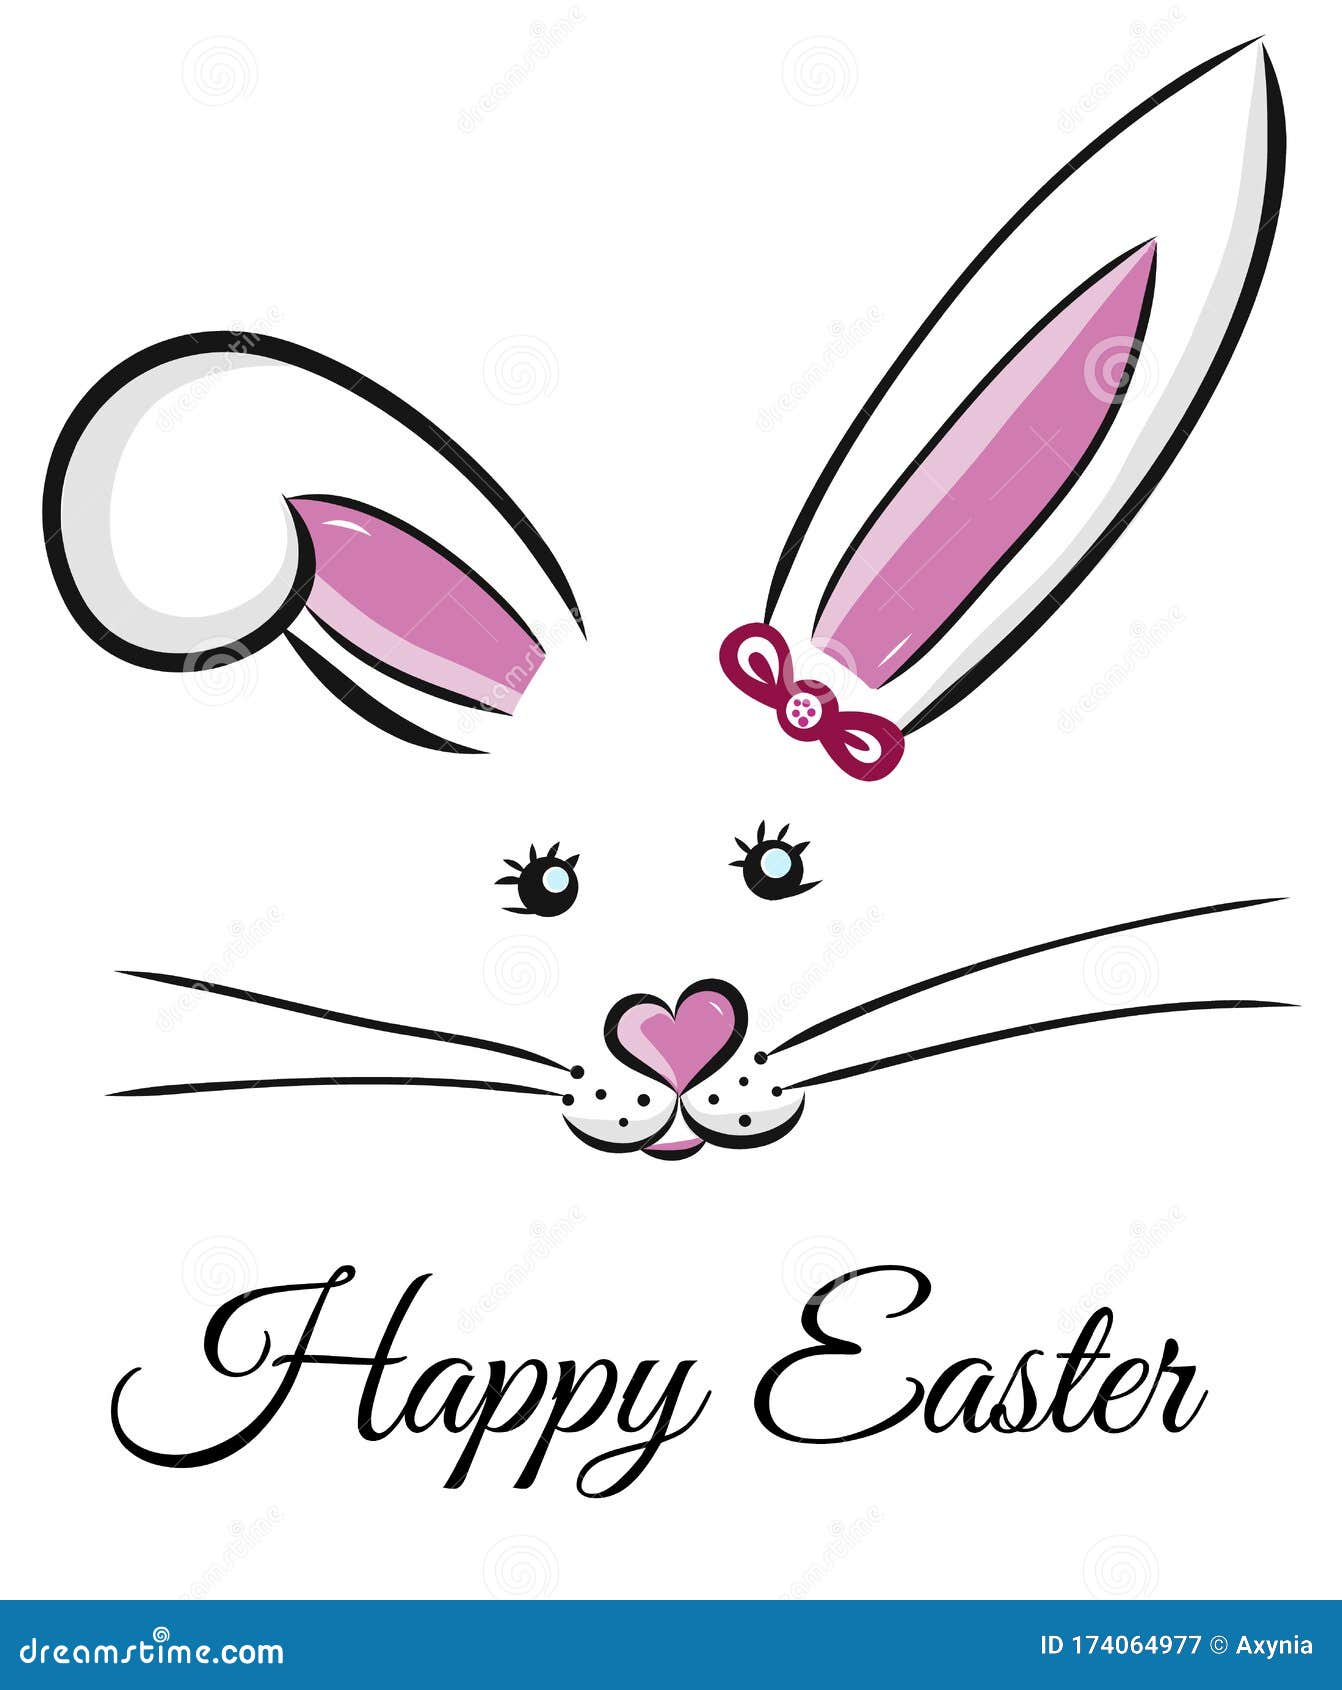 Easter Bunny Cute Vector Illustration Drawn By Hand. Bunny ...